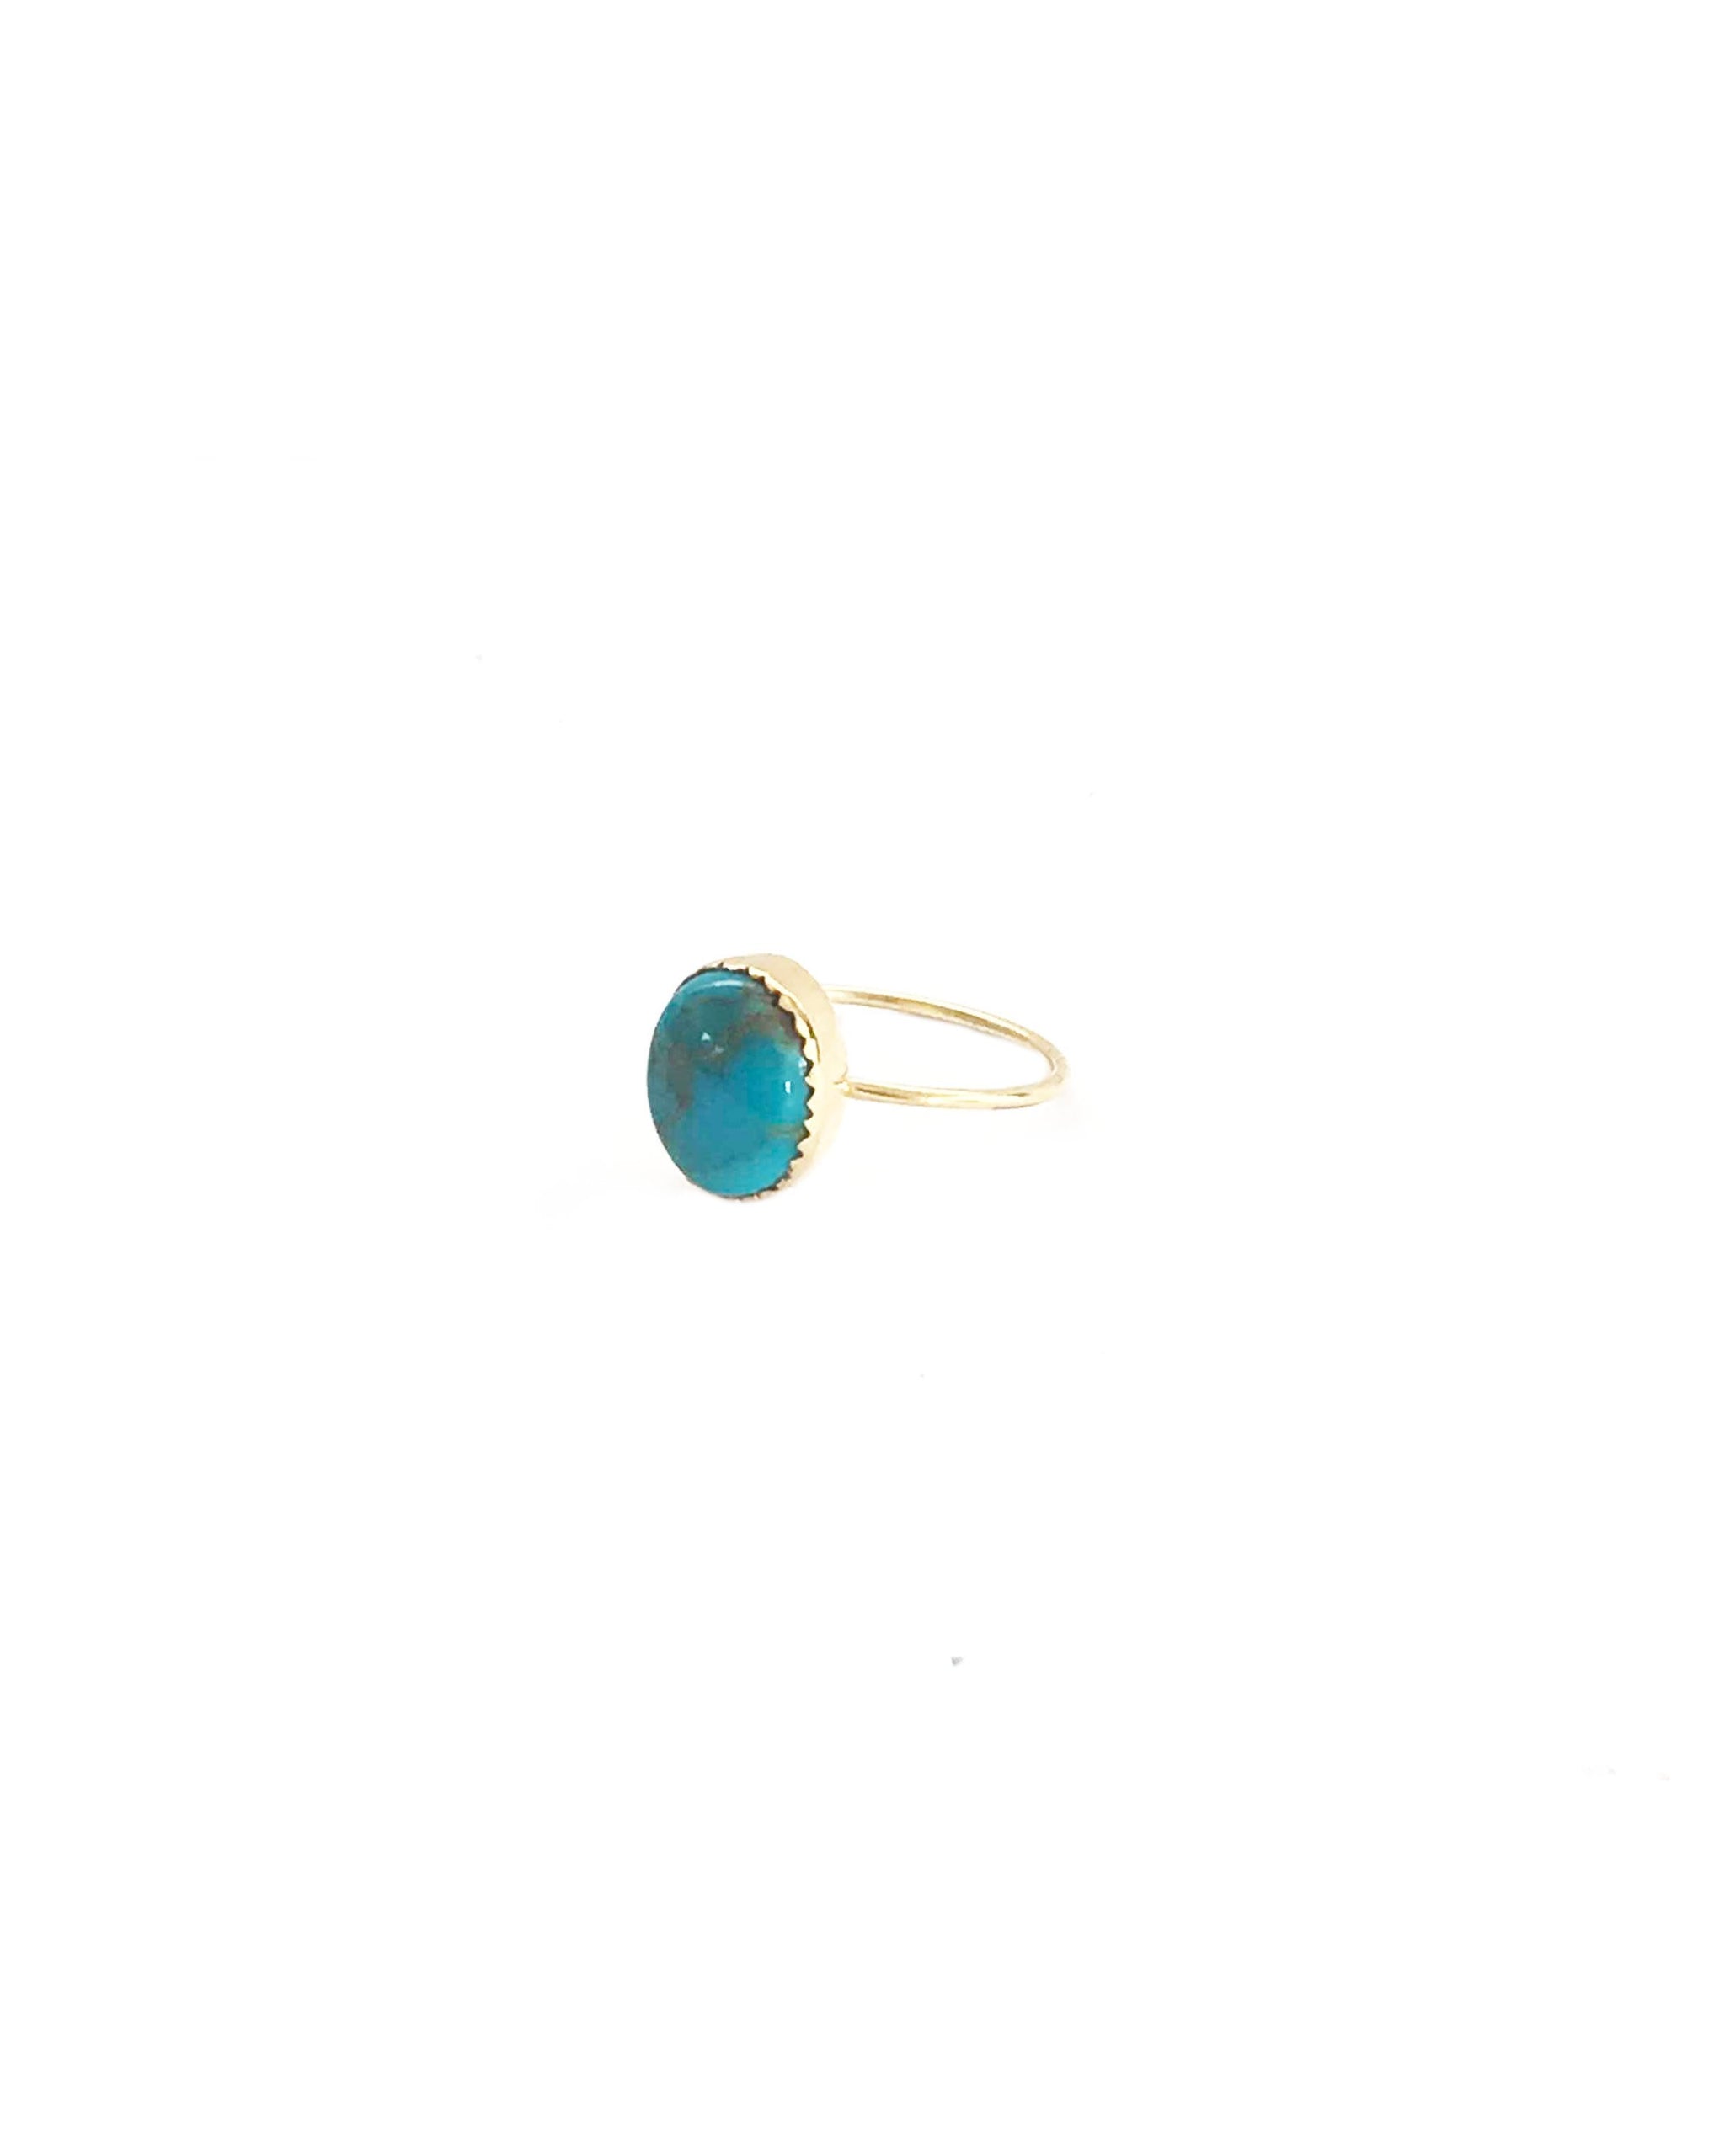 MOON DUST RING - GOLD - TURQUOISE + TOBACCO